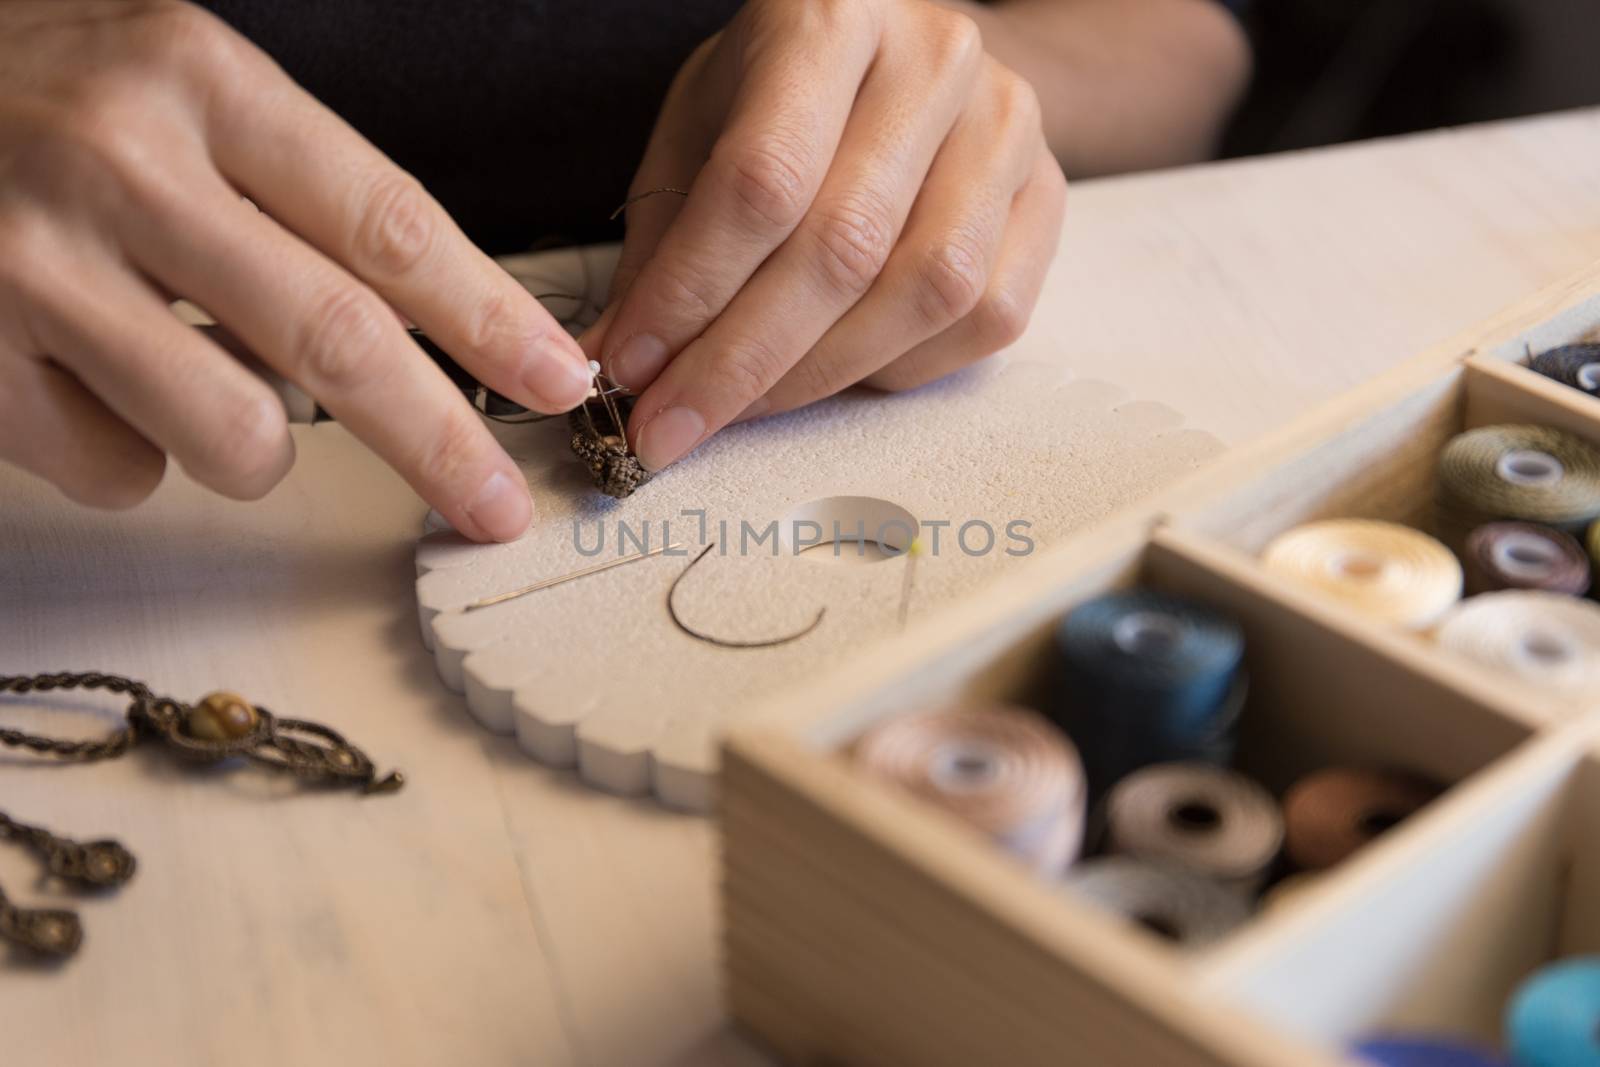 Lifestyle concept, work from home to reinvent your life: close-up of woman hands making macrame knotted jewelry with stone beads and tools on light wooden table